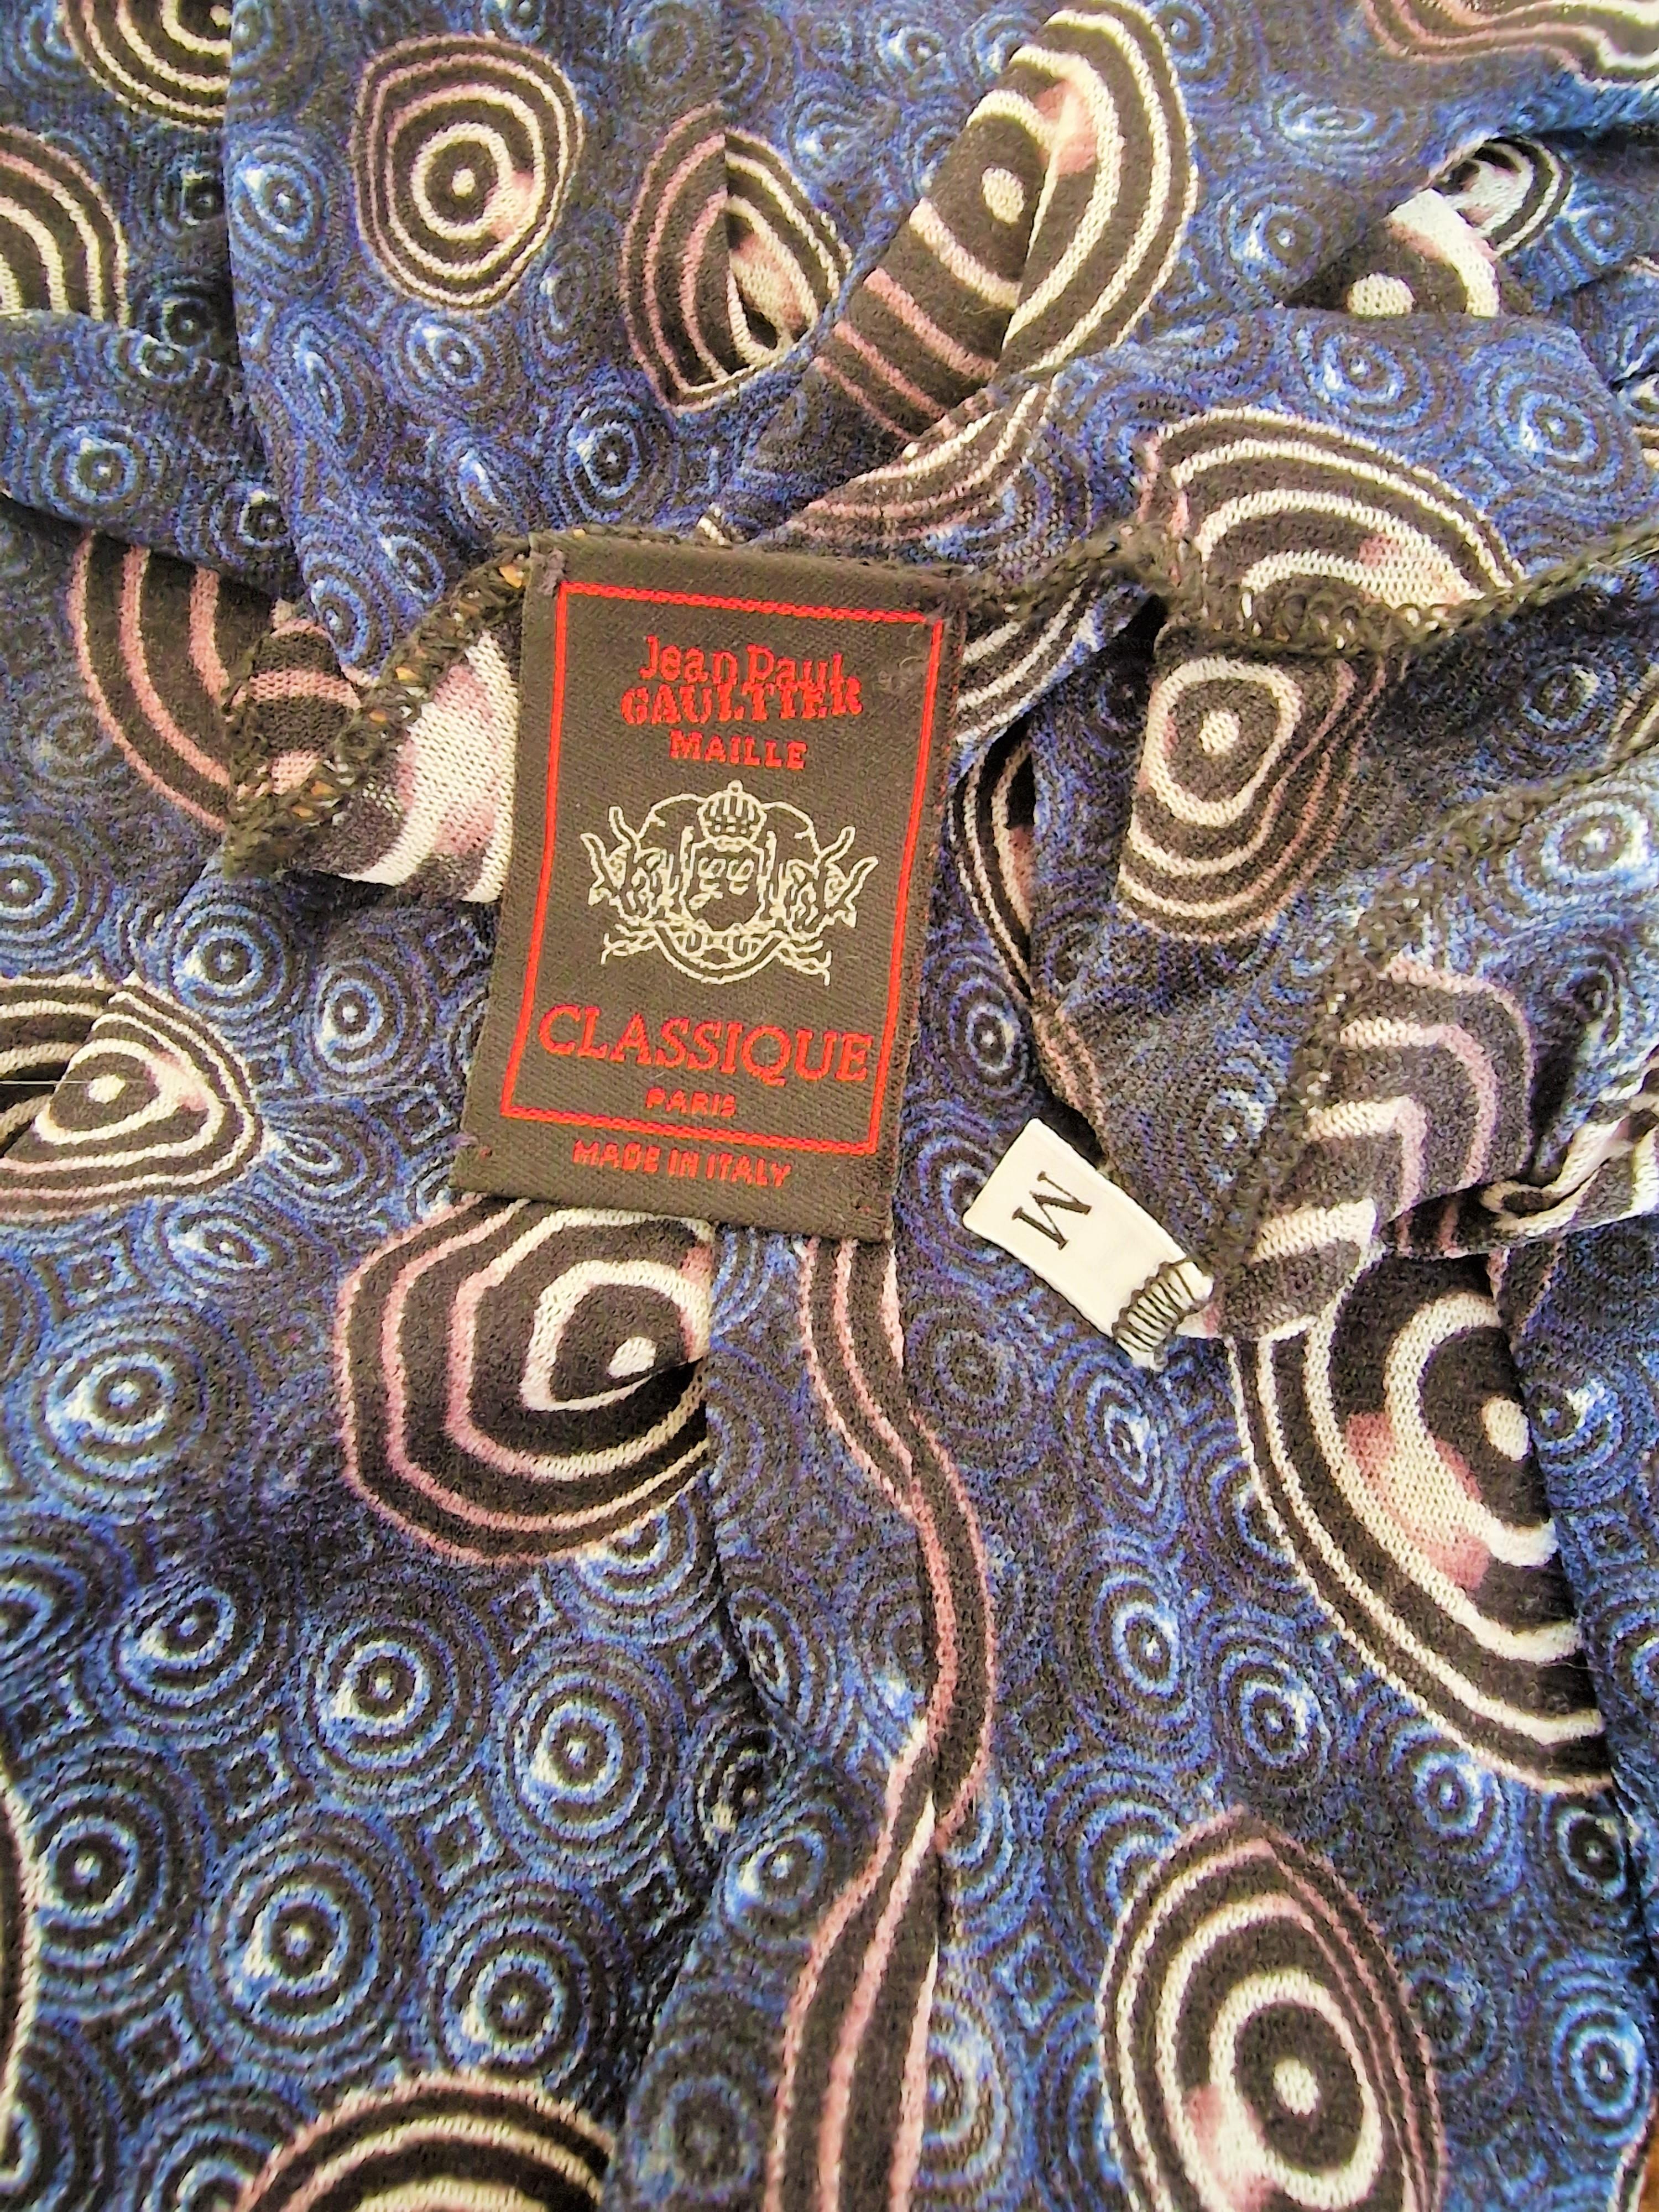 Jean Paul Gaultier Optical Illusion Bubble Psychedelic Vintage Tee T-shirt Top For Sale 7